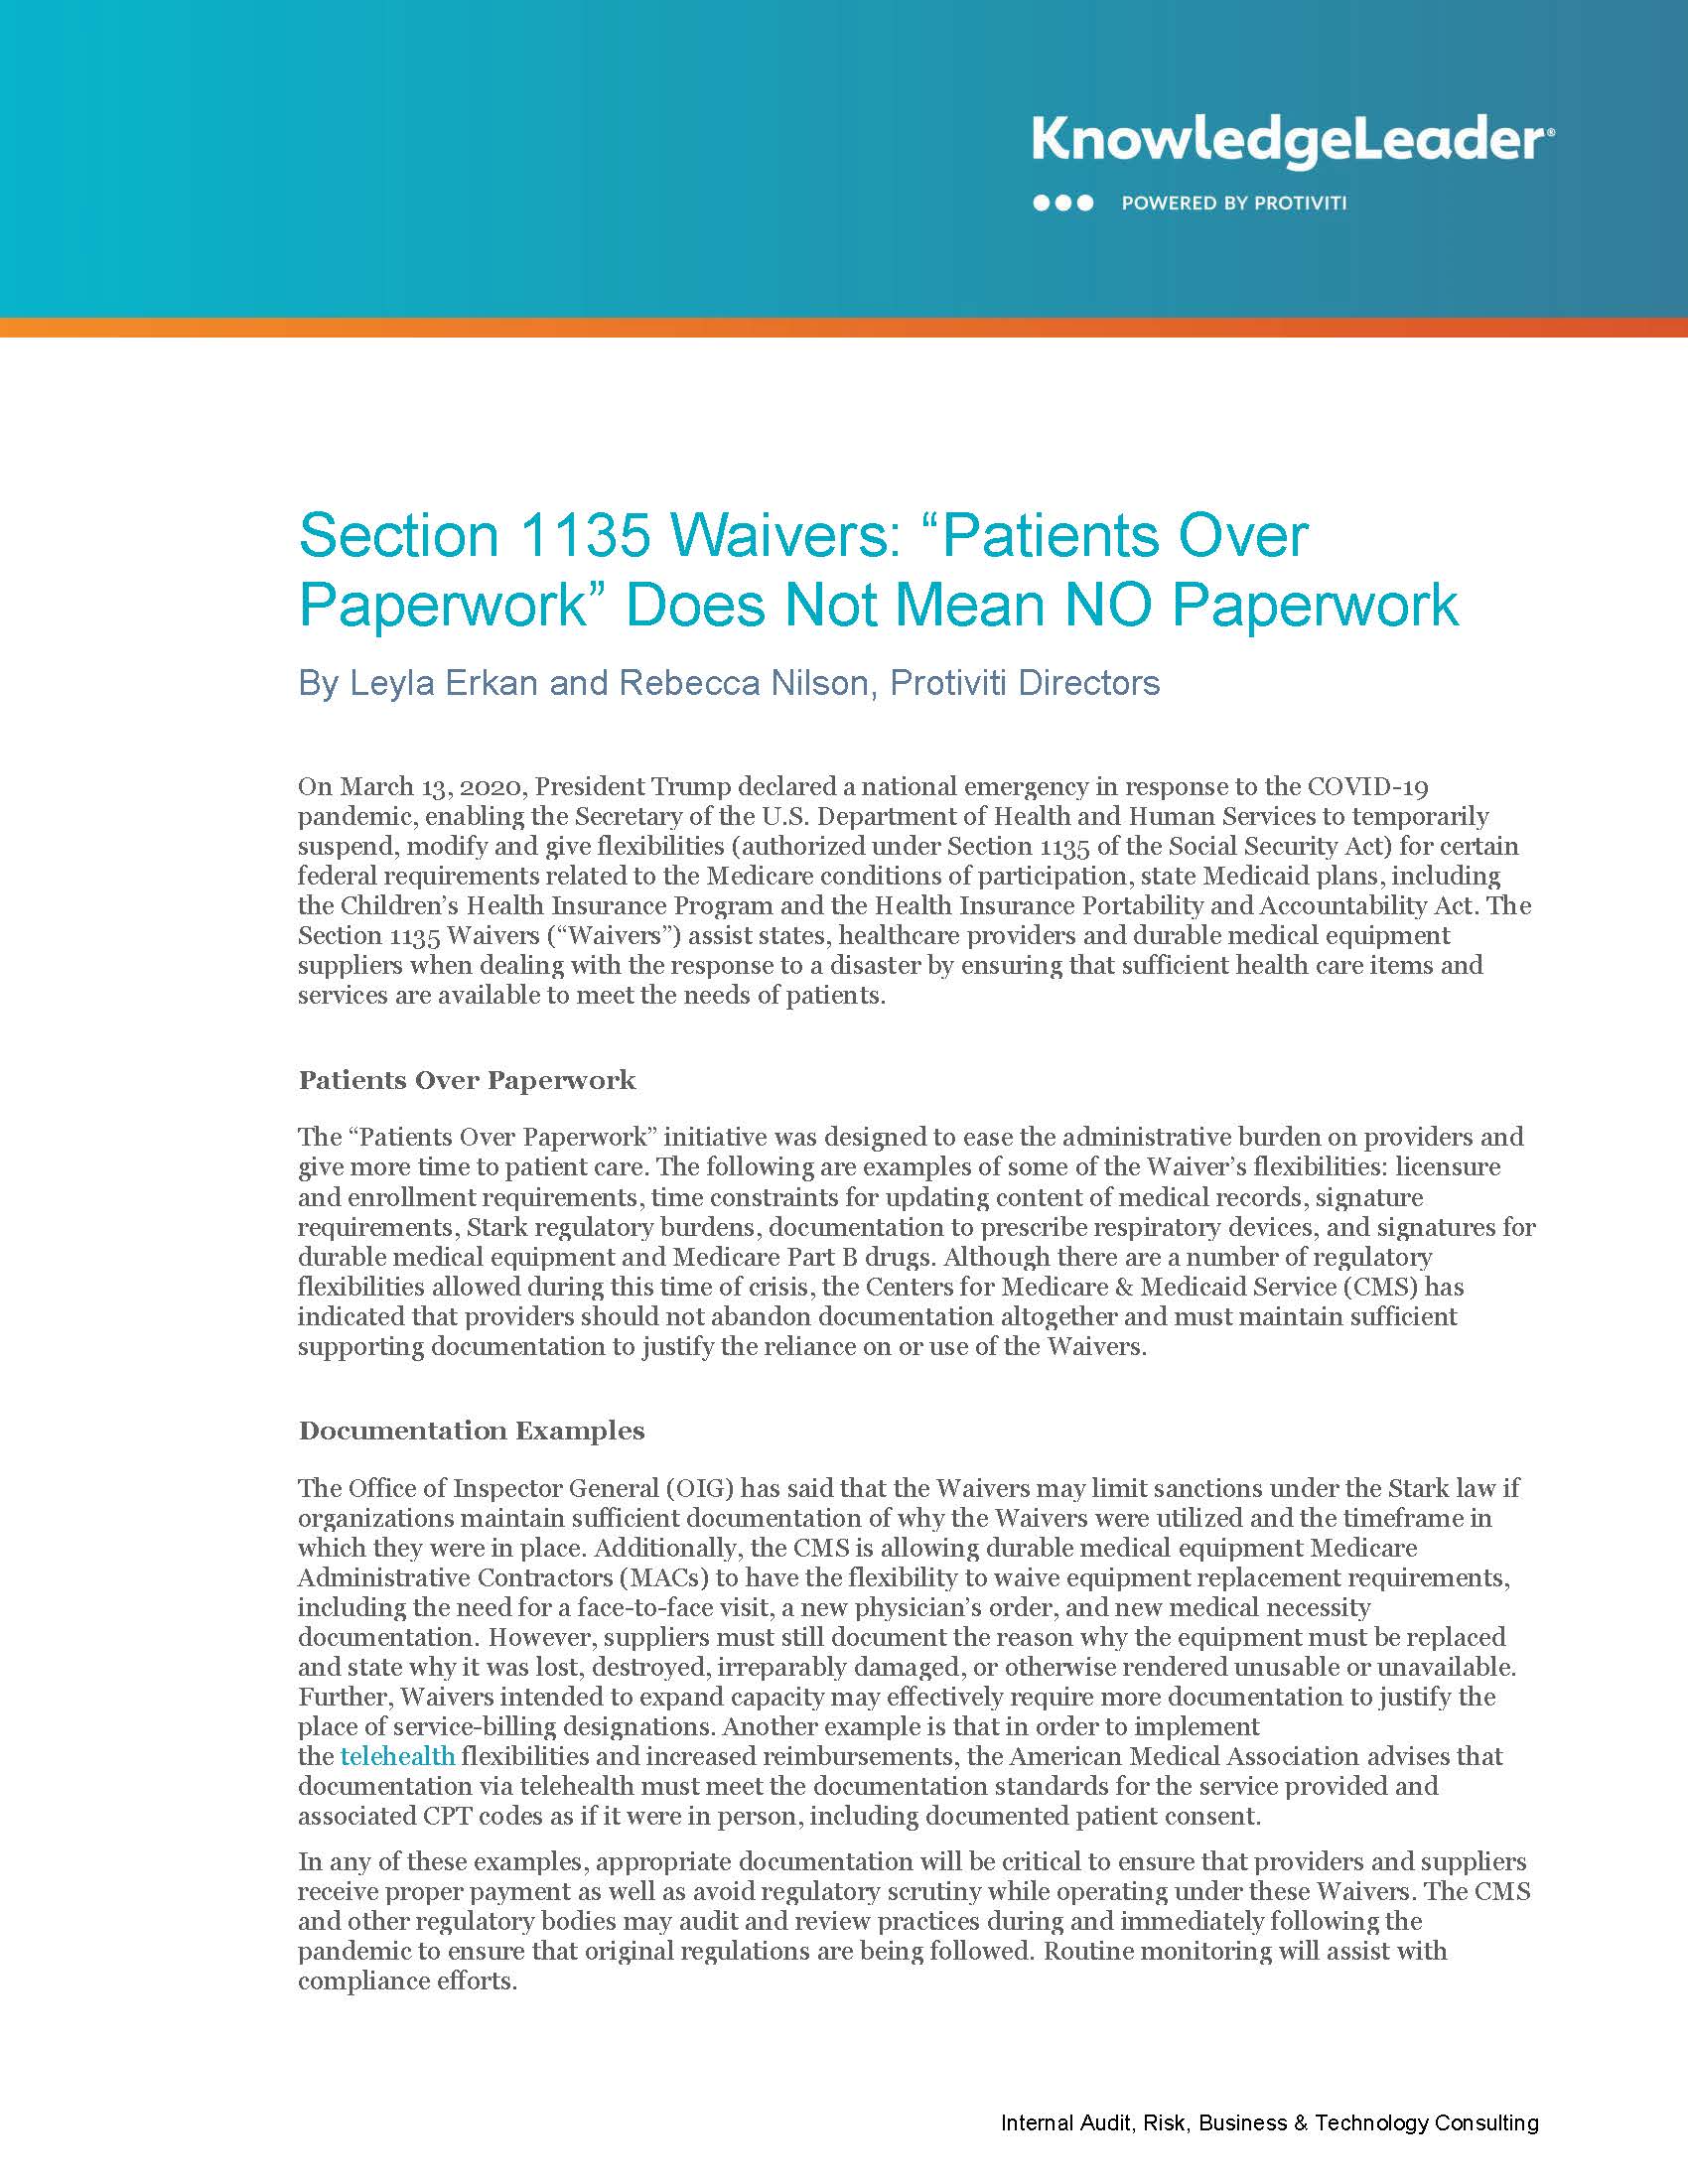 Section 1135 Waivers: “Patients Over Paperwork” Does Not Mean NO Paperwork